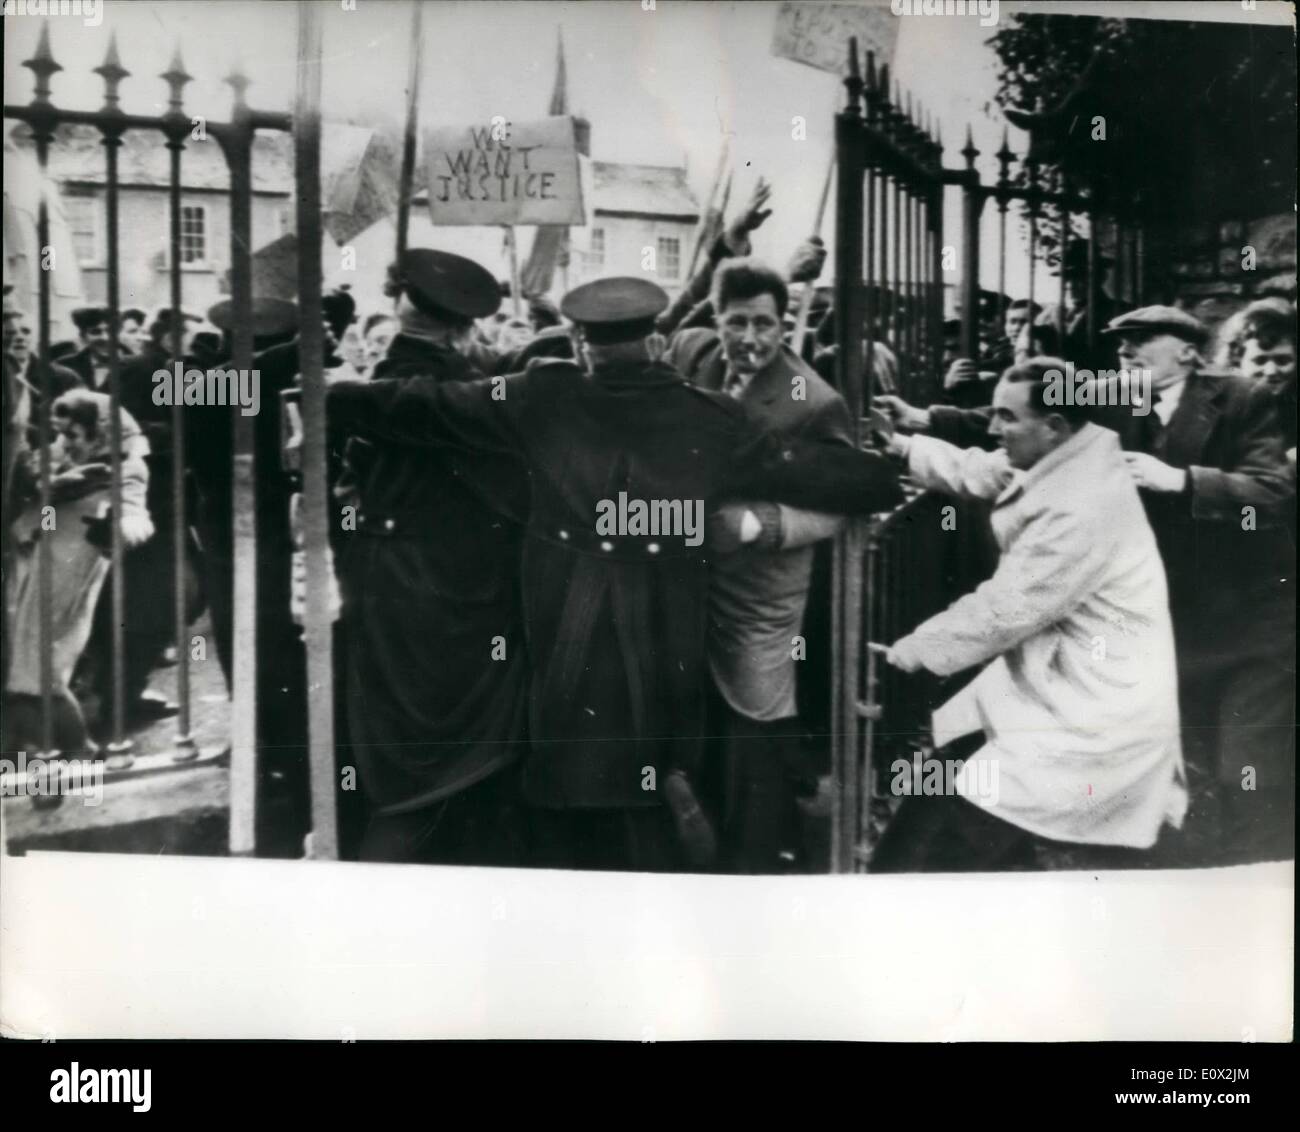 Jan. 01, 1965 - Royal Visit court STC med st. rioters. Demonstrators struggle with Police: A rioting men injured police, hurled Stock Photo